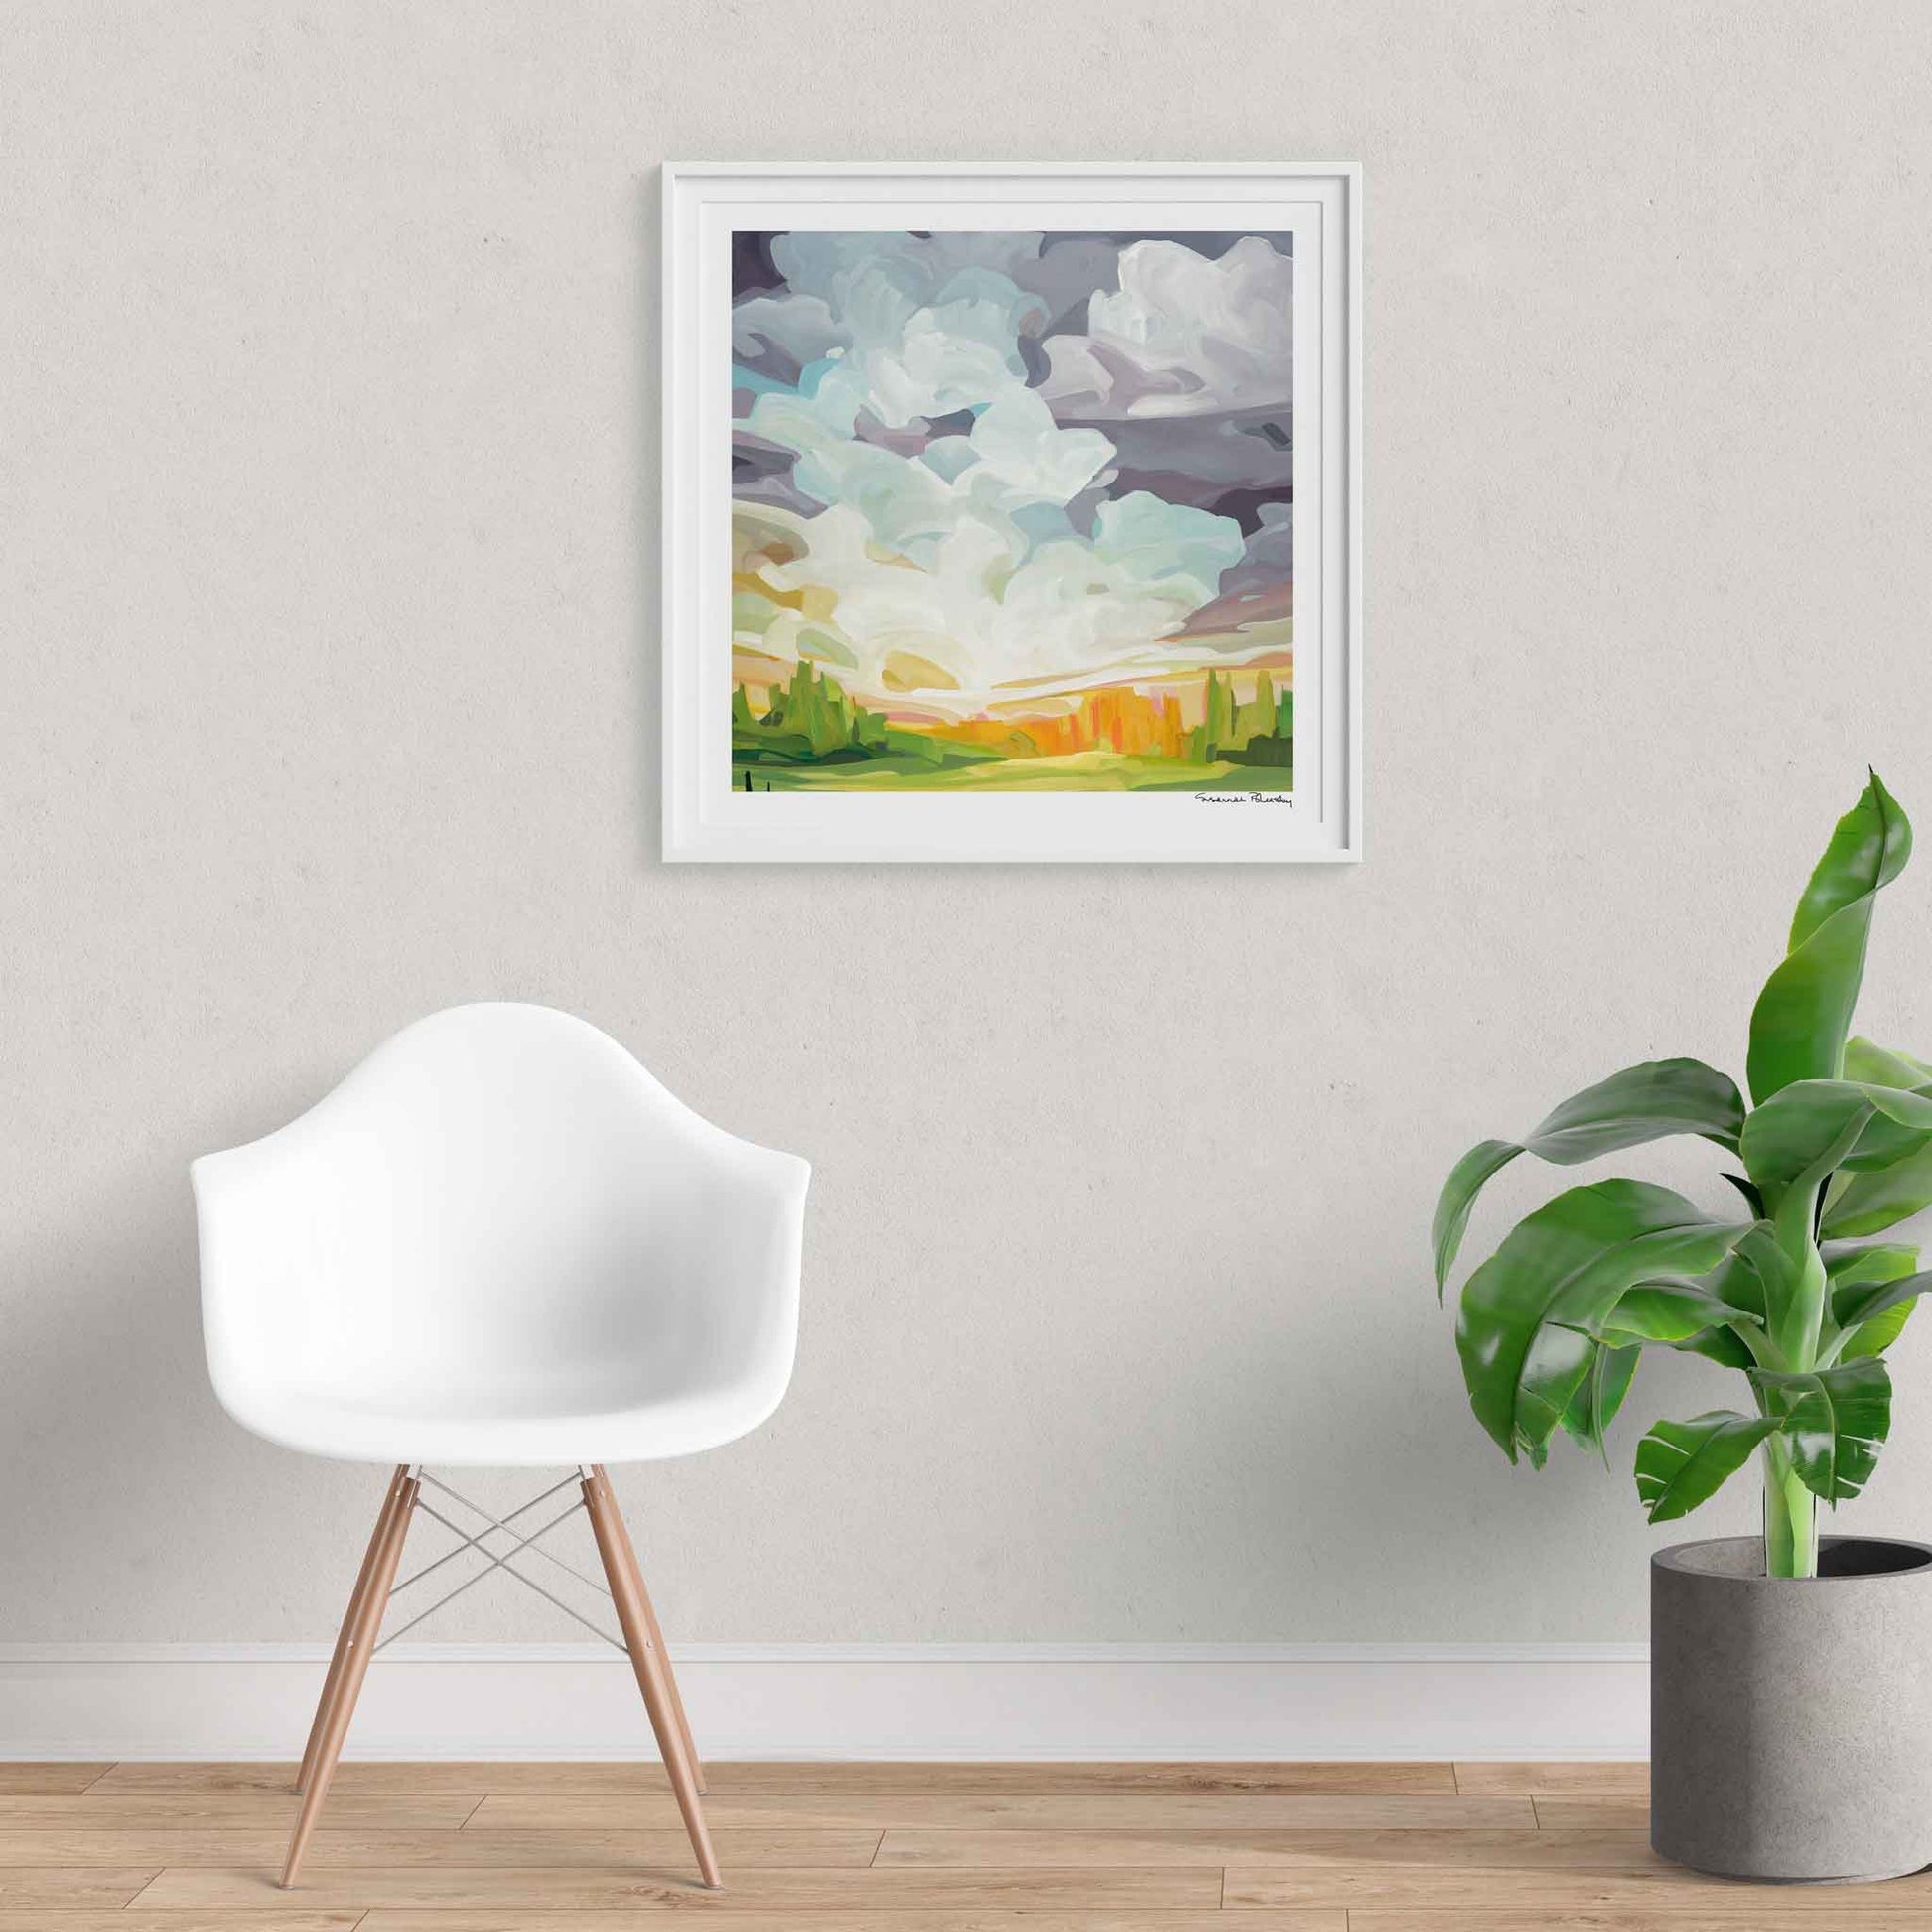 Framed 20x20 square art print of a light mauve sunrise painting by Canadian artist Susannah Bleasby